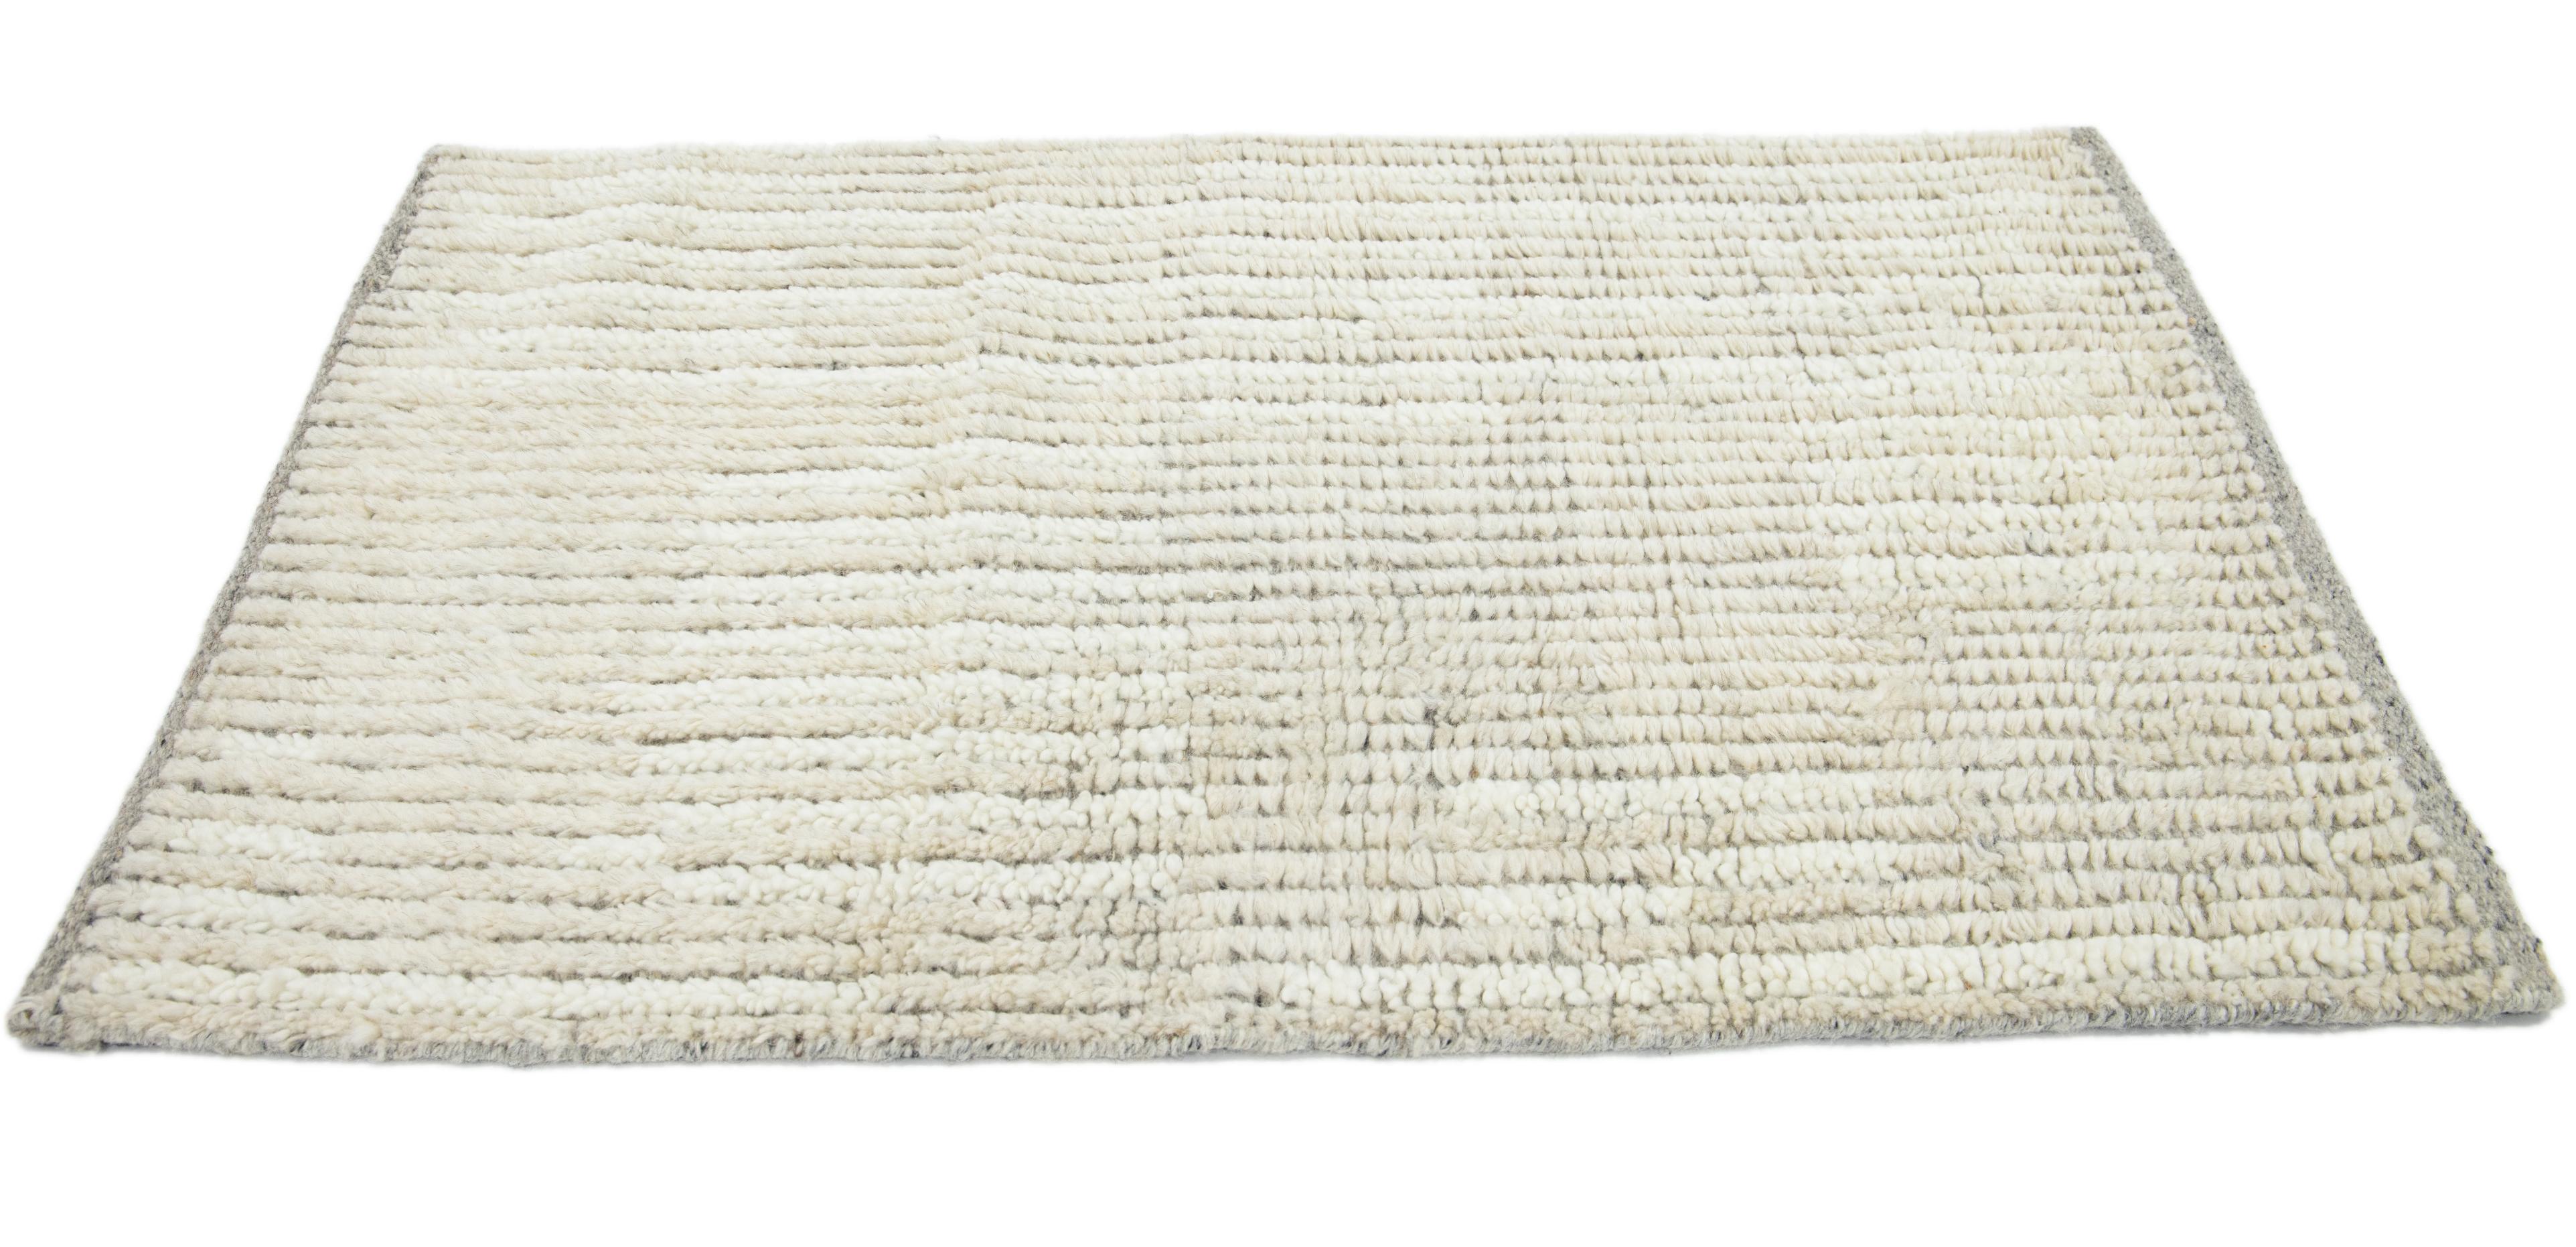 Apadana's Modern Moroccan Style custom wool rug. Custom sizes and colors made-to-order. 

Material: Wool 
Techniques: Hand-Woven
Style: Moroccan 
Lead time: Approx. 15-16 wks available 
Colors: As shown, other custom colors are available. 
Origen: